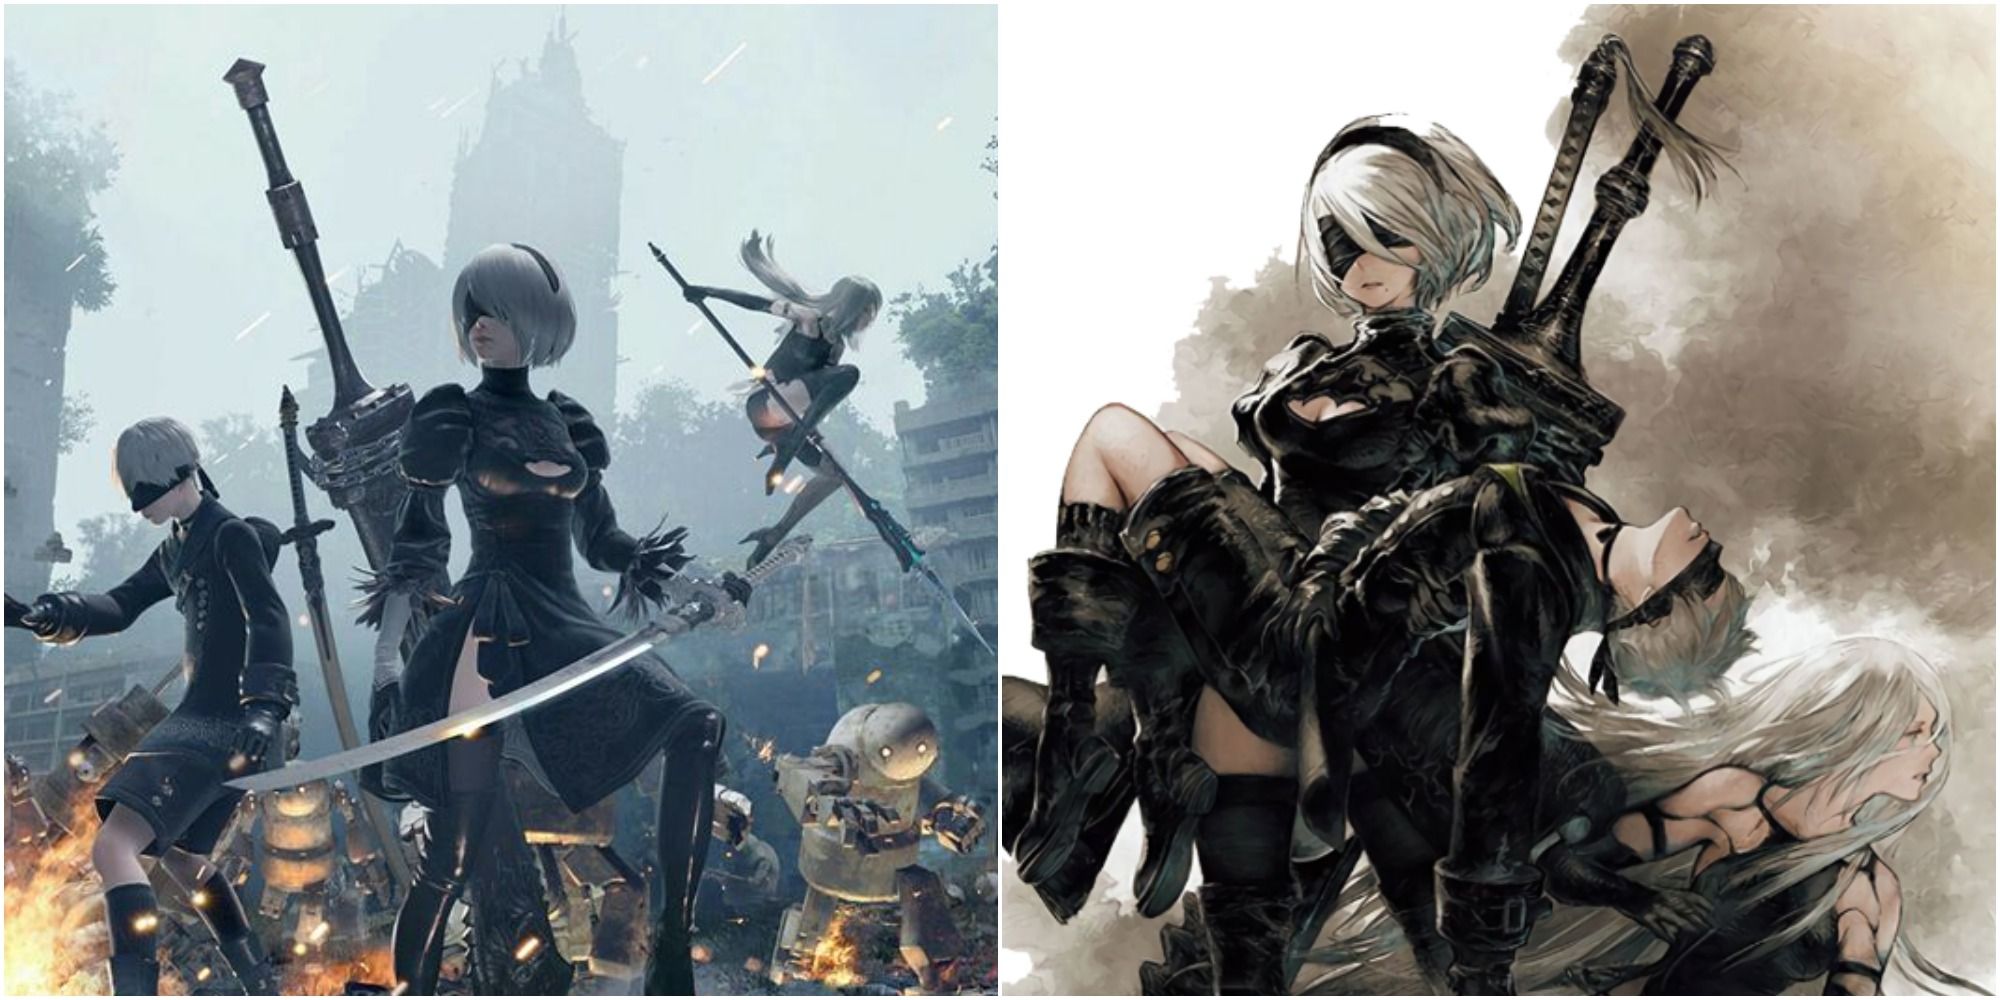 Nier Automata - Both Covers showing 2B, 9S, A2, and some machines